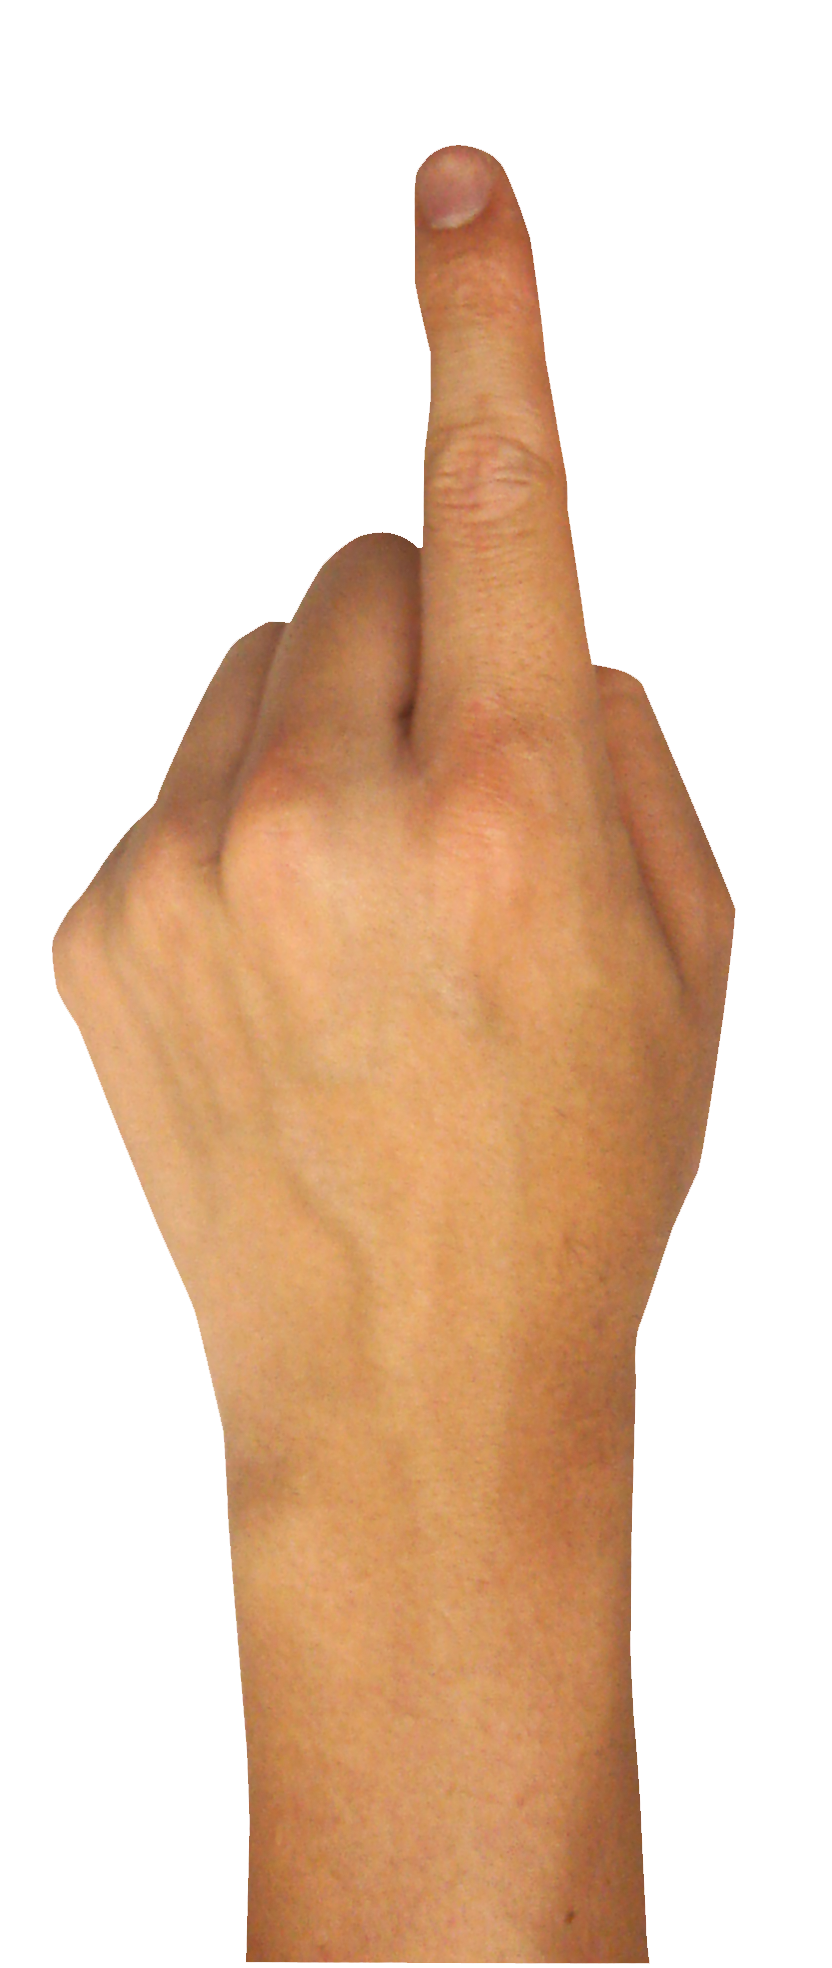 Finger Png By Digitalwideresource Finger Png By Digitalwideresource - Finger, Transparent background PNG HD thumbnail